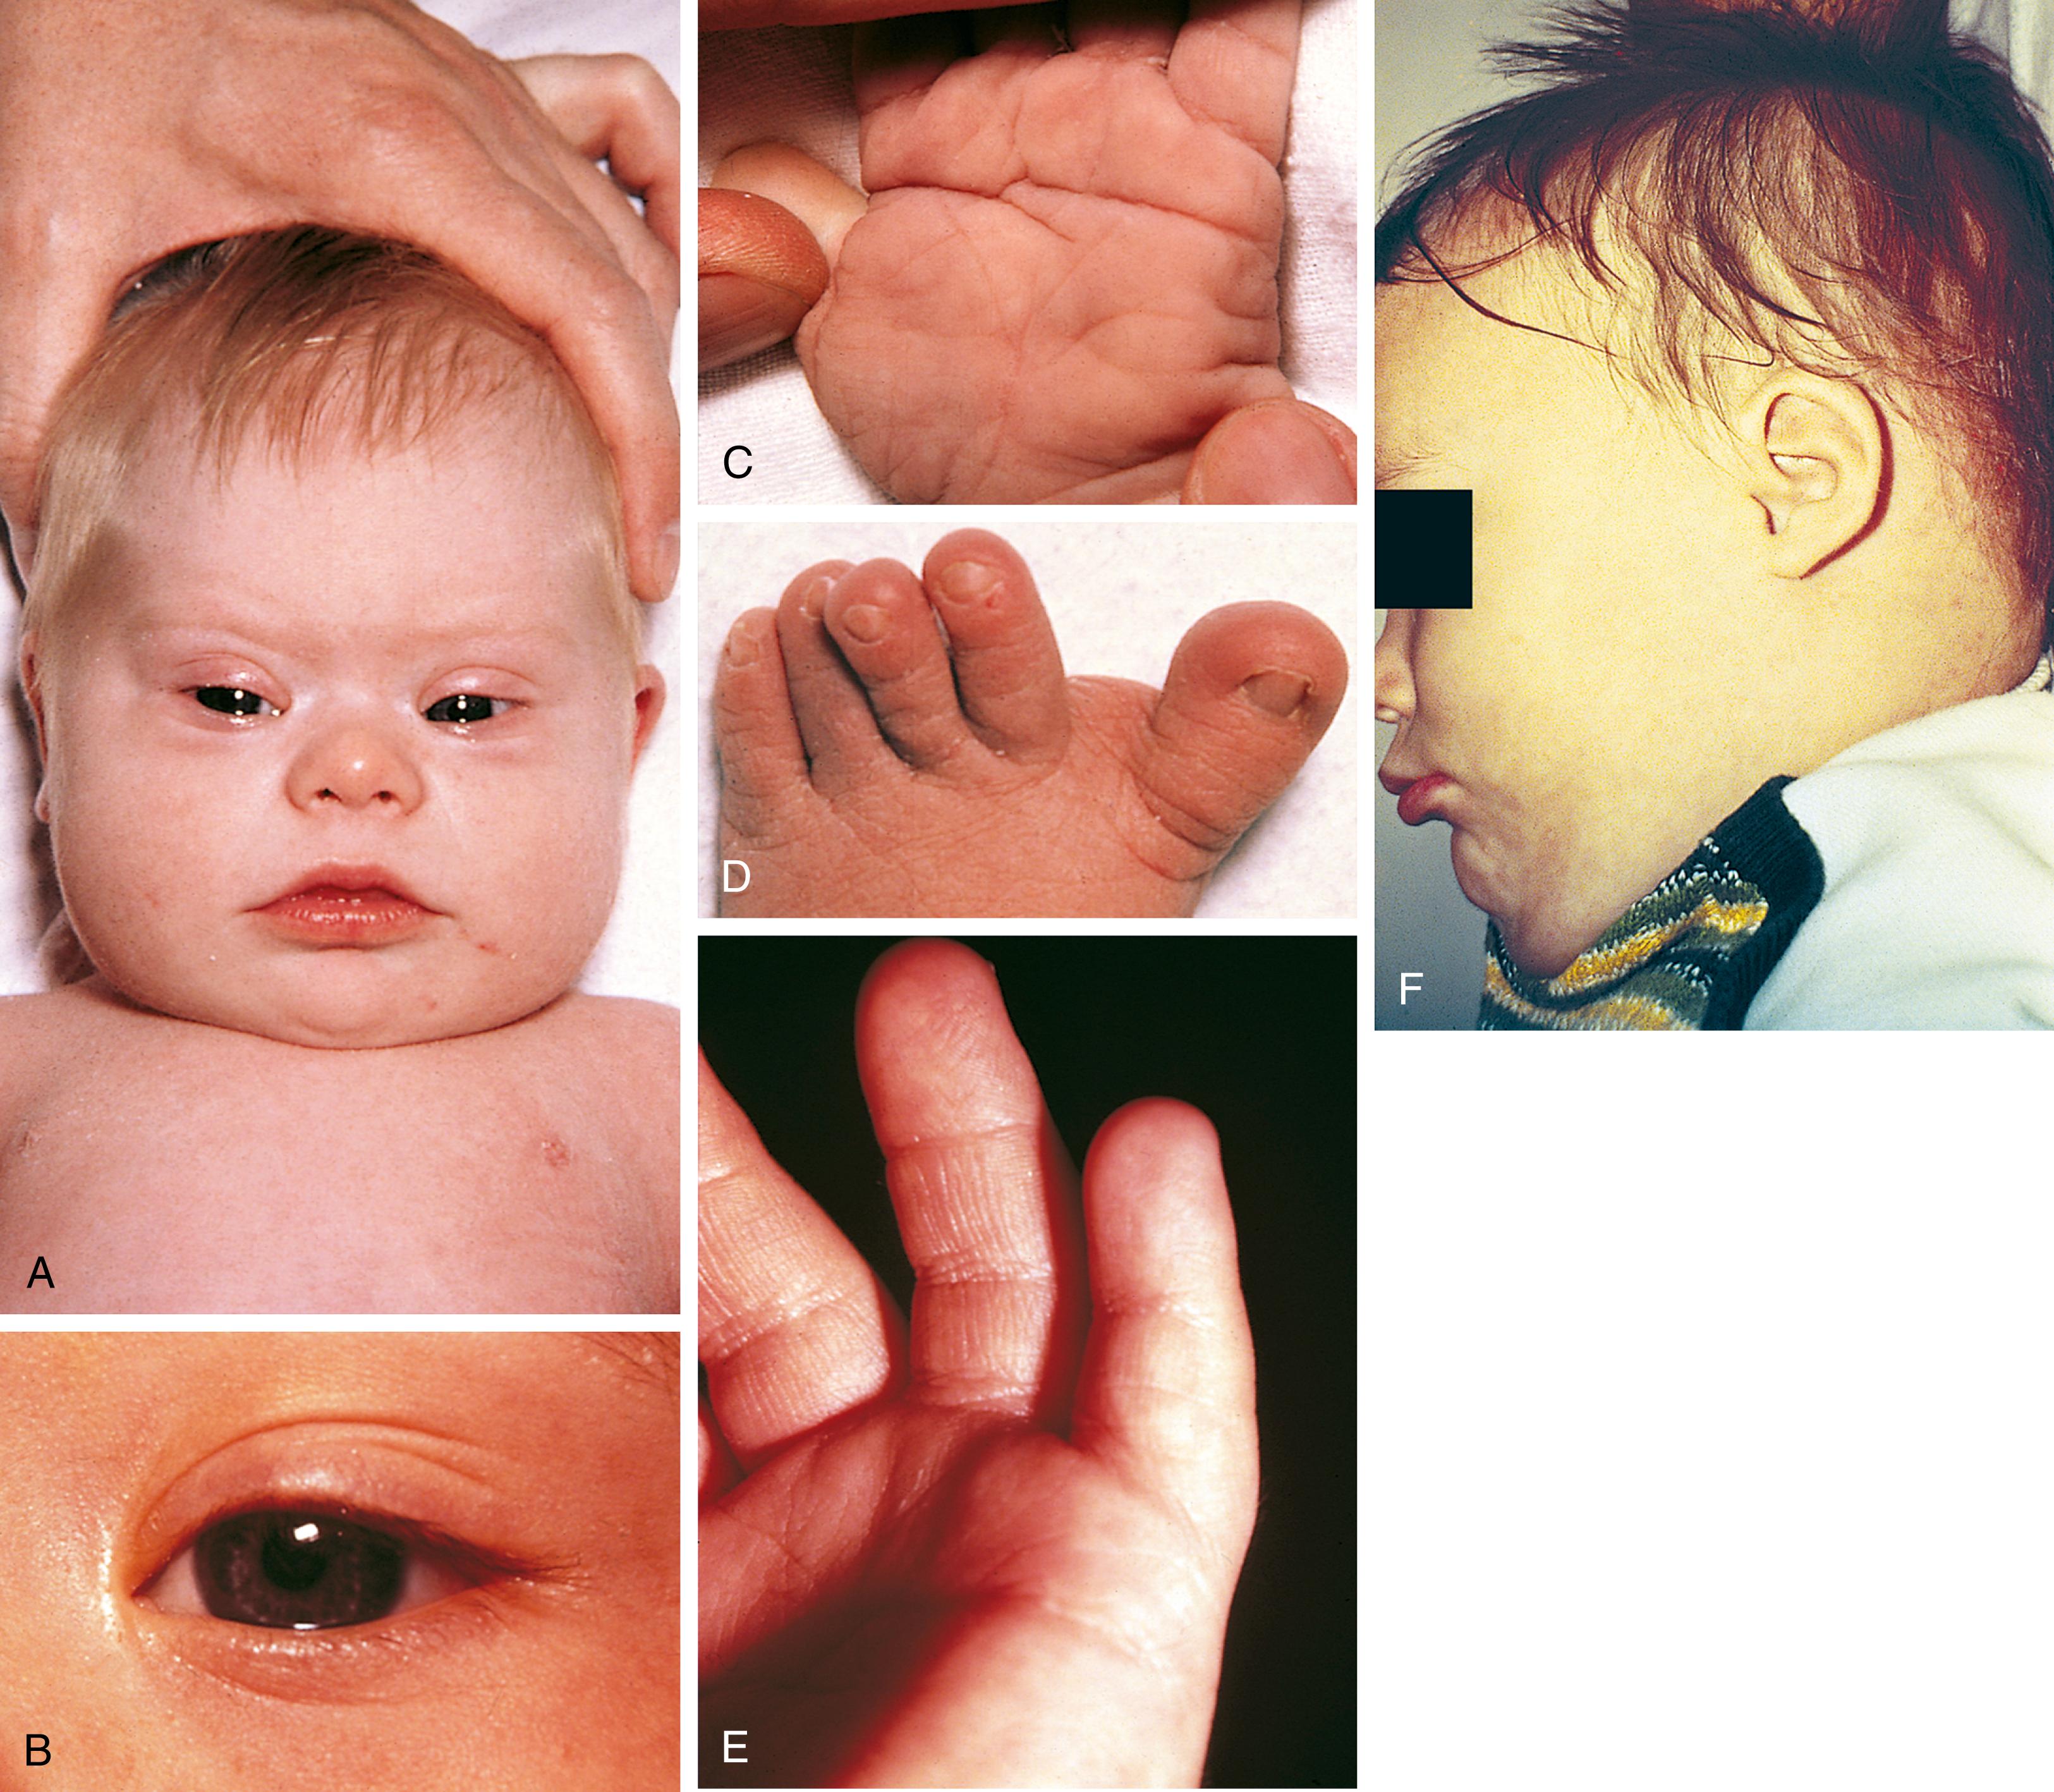 Fig. 1.15, Down syndrome. These clinical photographs show several minor anomalies associated with this disorder. (A) Characteristic facial features with up-slanting palpebral fissures, epicanthal folds, and flat nasal bridge. (B) Brushfield spots. (C) Bridged palmar crease, seen in some affected infants. Two transverse palmar creases are connected by a diagonal line. (D) Wide space between first and second toes. (E) Short fifth finger. (F) Small ears and flat occiput.